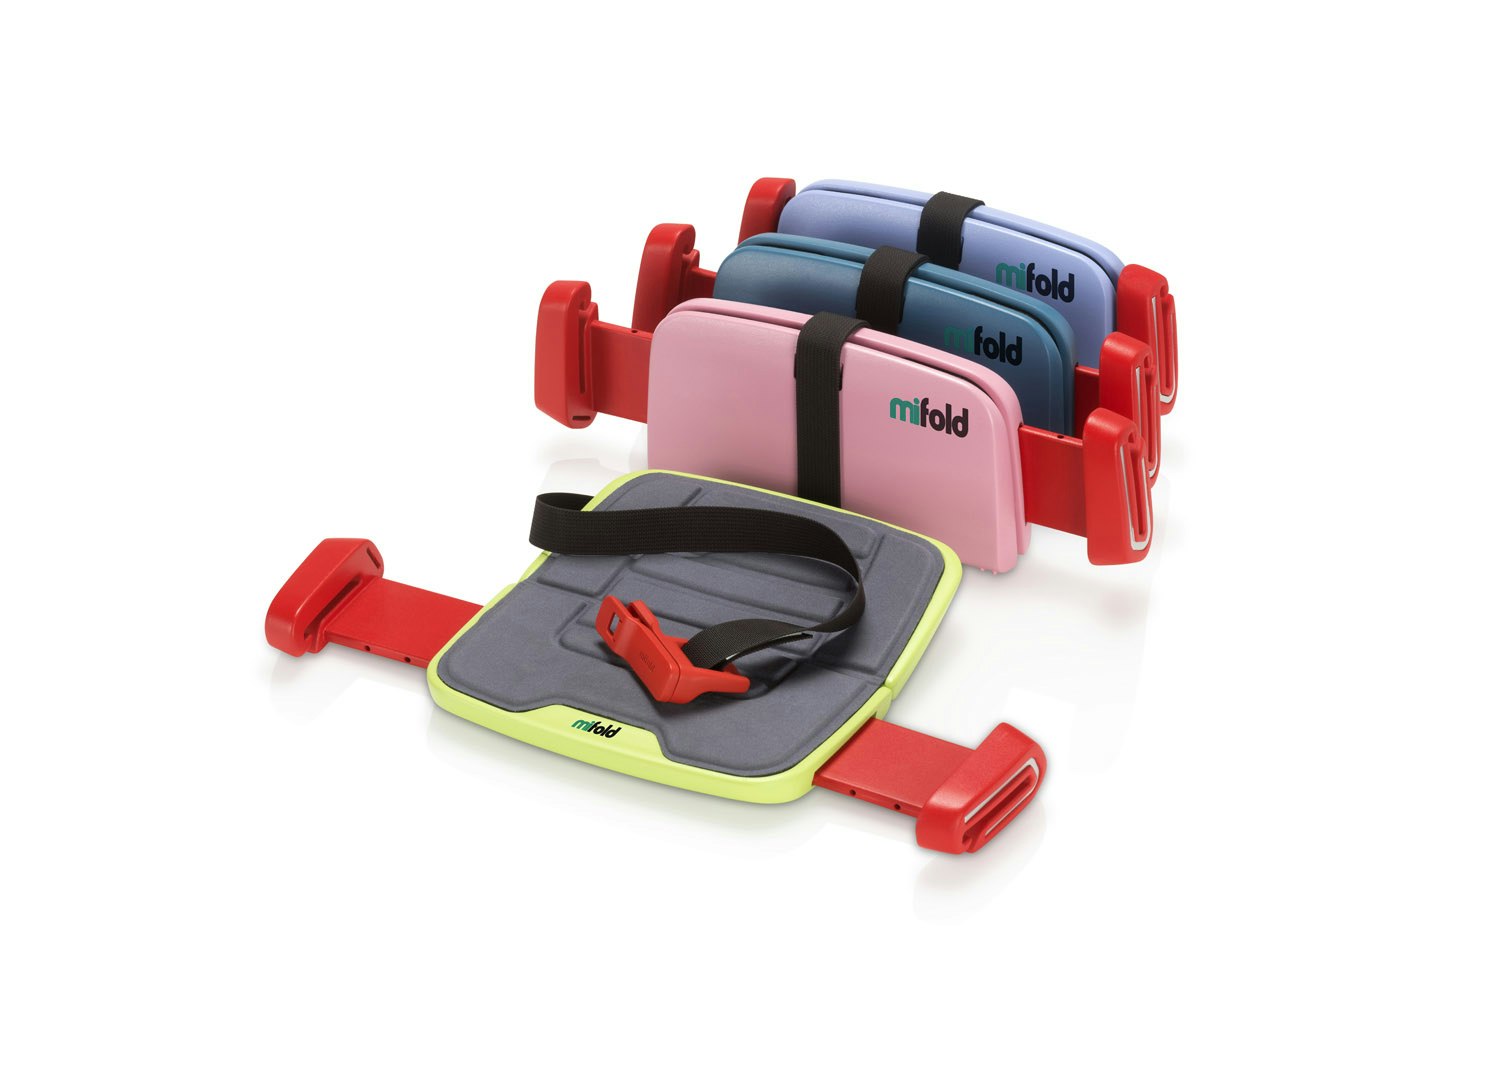 Mifold Car Booster Seat Review: Portable, Safe, Easy to Use, and